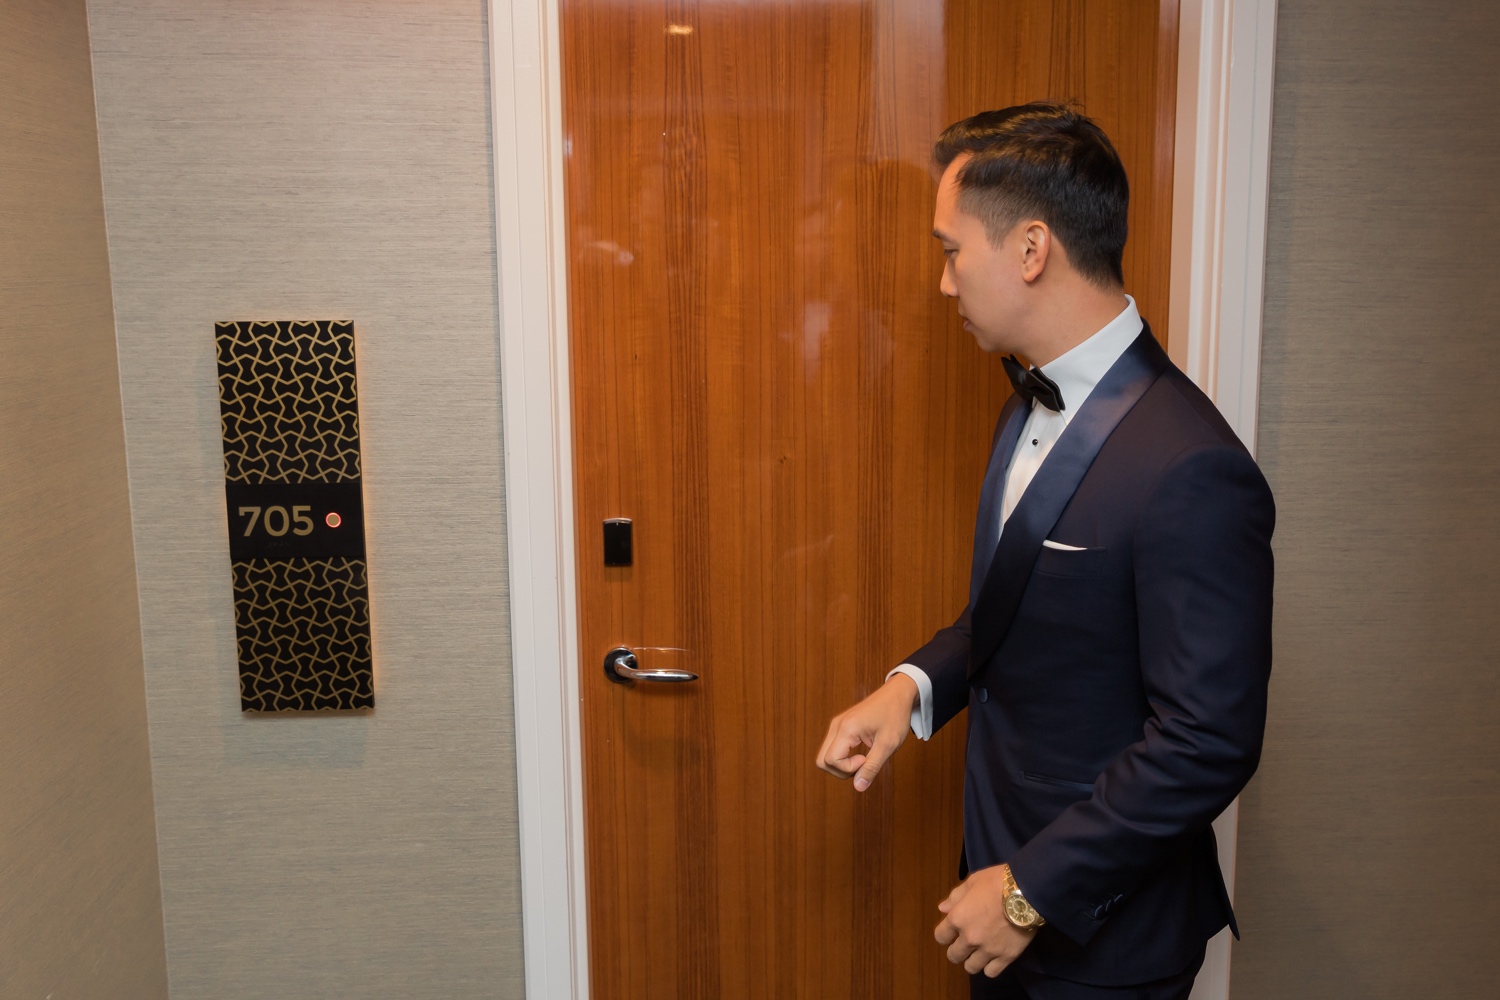 A groom knocking a door to meet his bride in Mr. C Seaport Hotel on a wedding day at Cipriani Wall Street in New York City. 